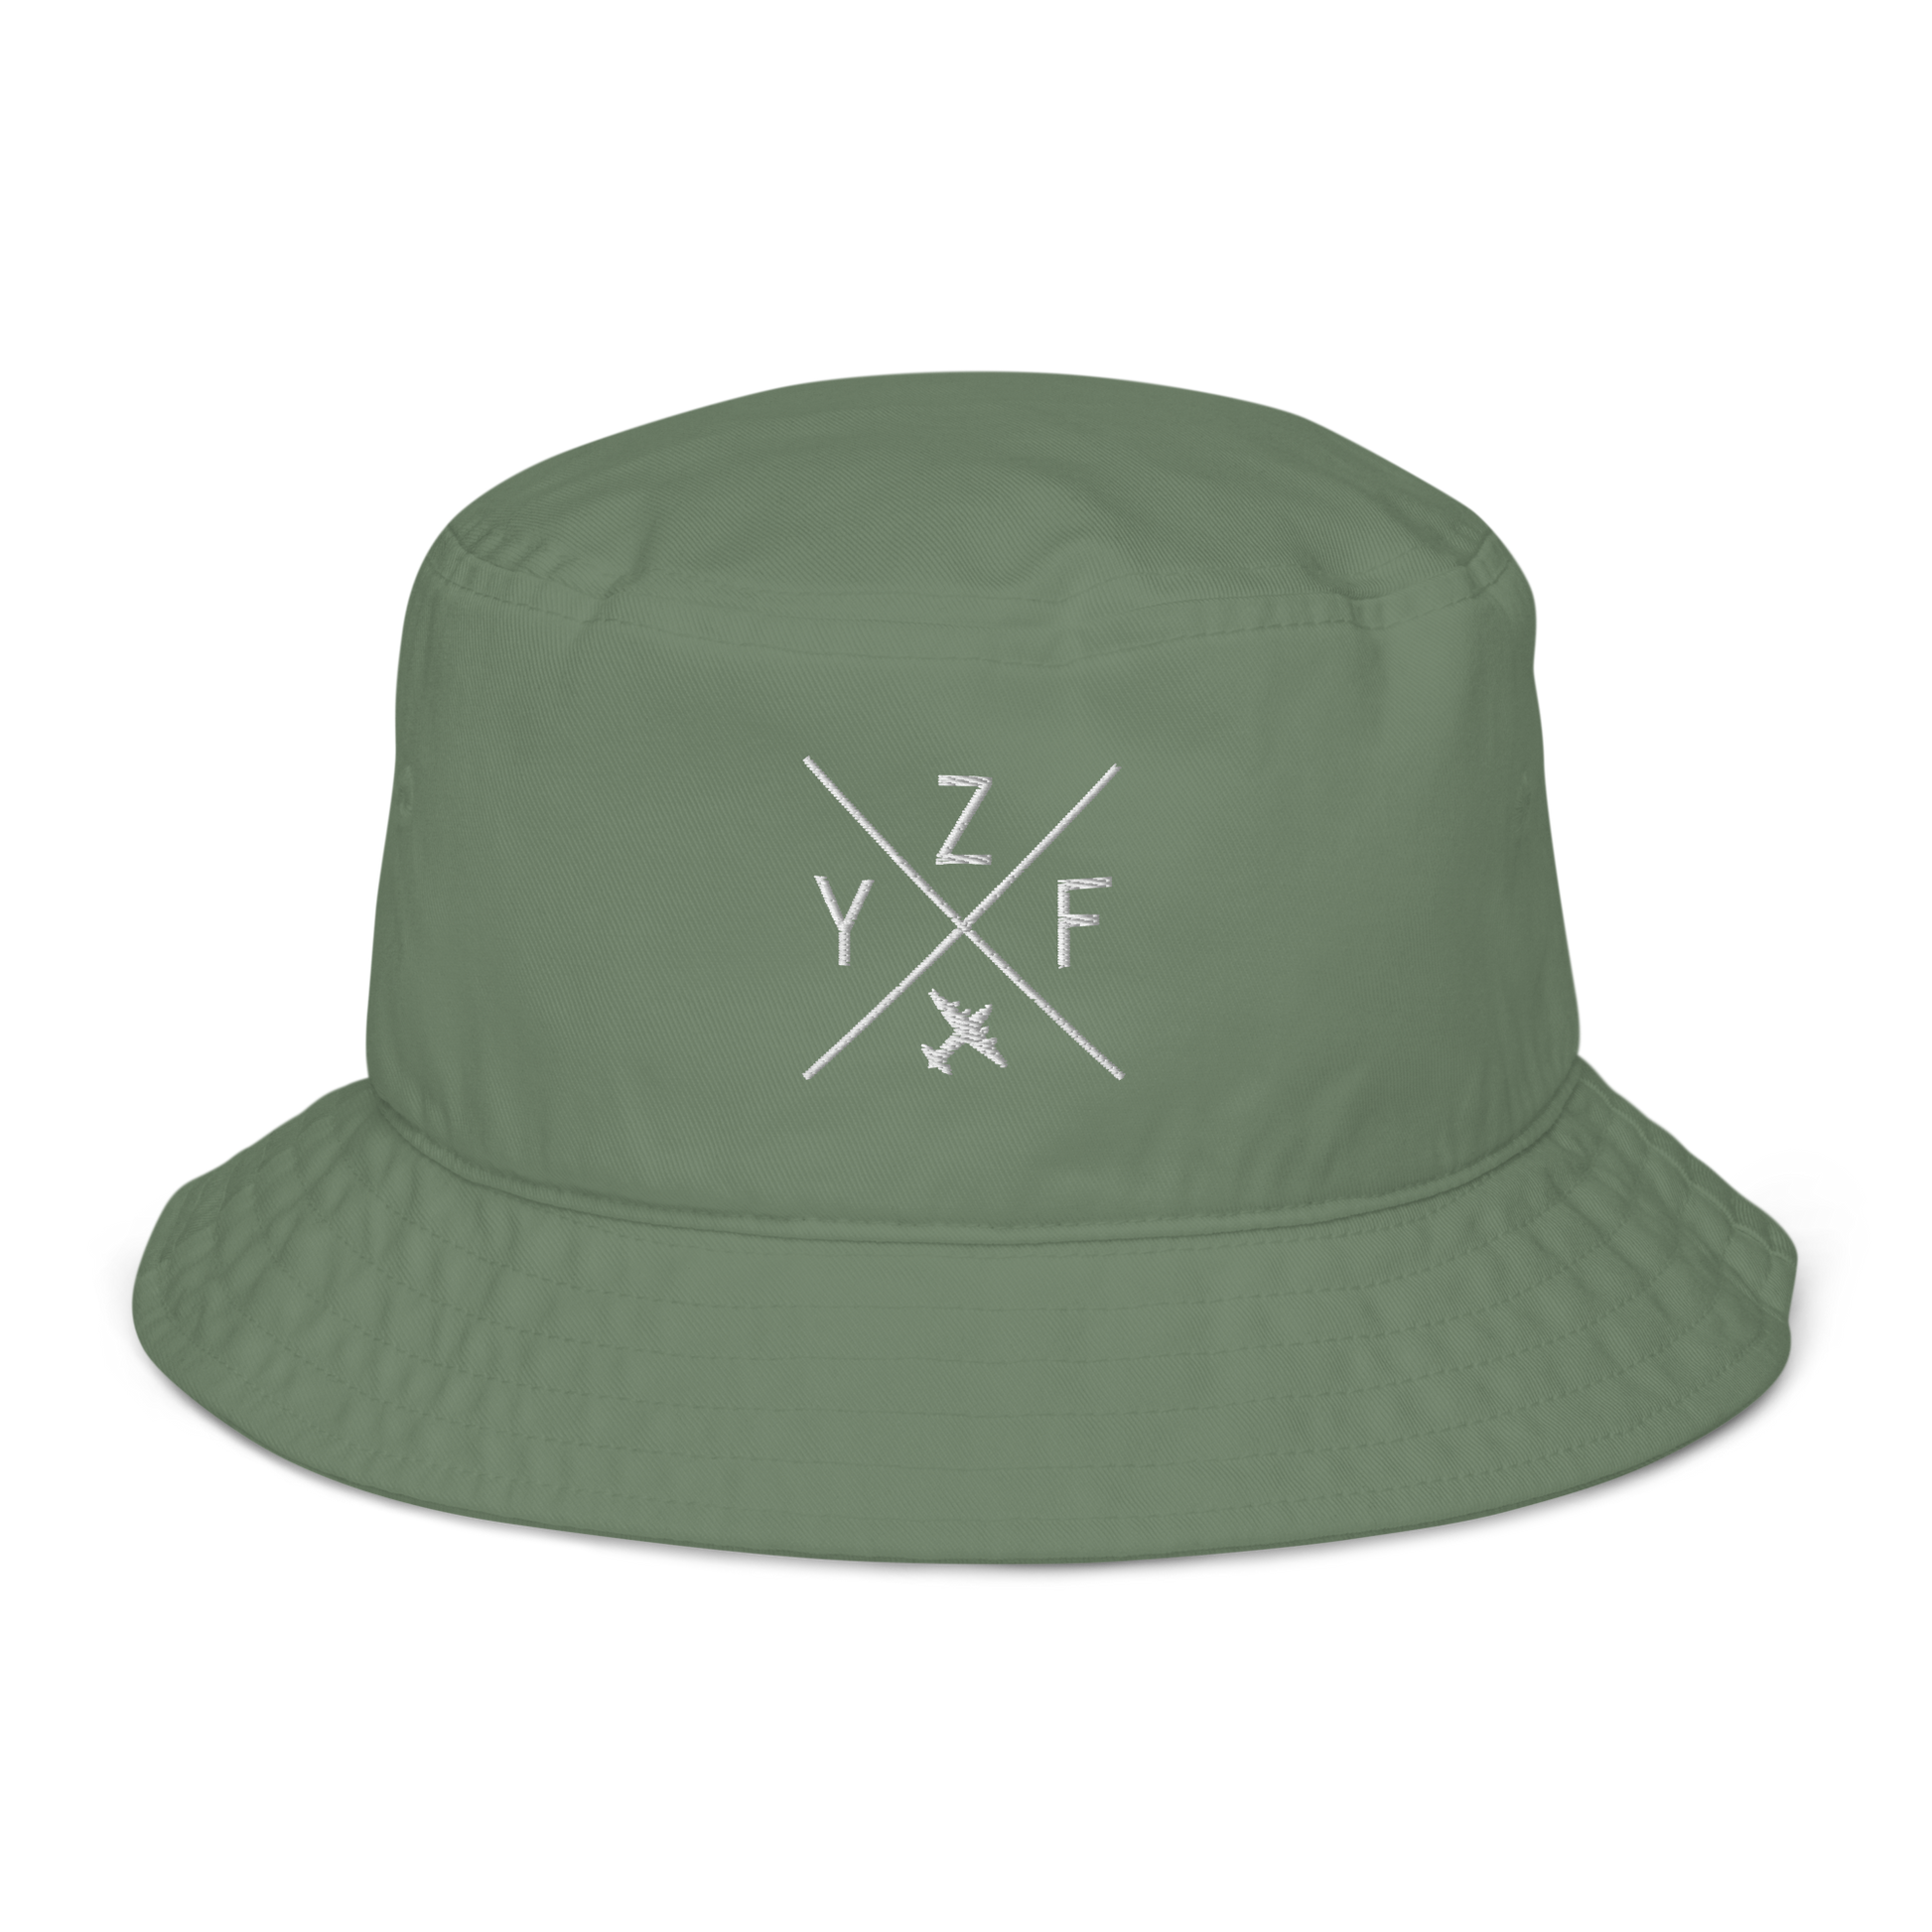 YHM Designs - YZF Yellowknife Organic Cotton Bucket Hat - Crossed-X Design with Airport Code and Vintage Propliner - White Embroidery - Image 06